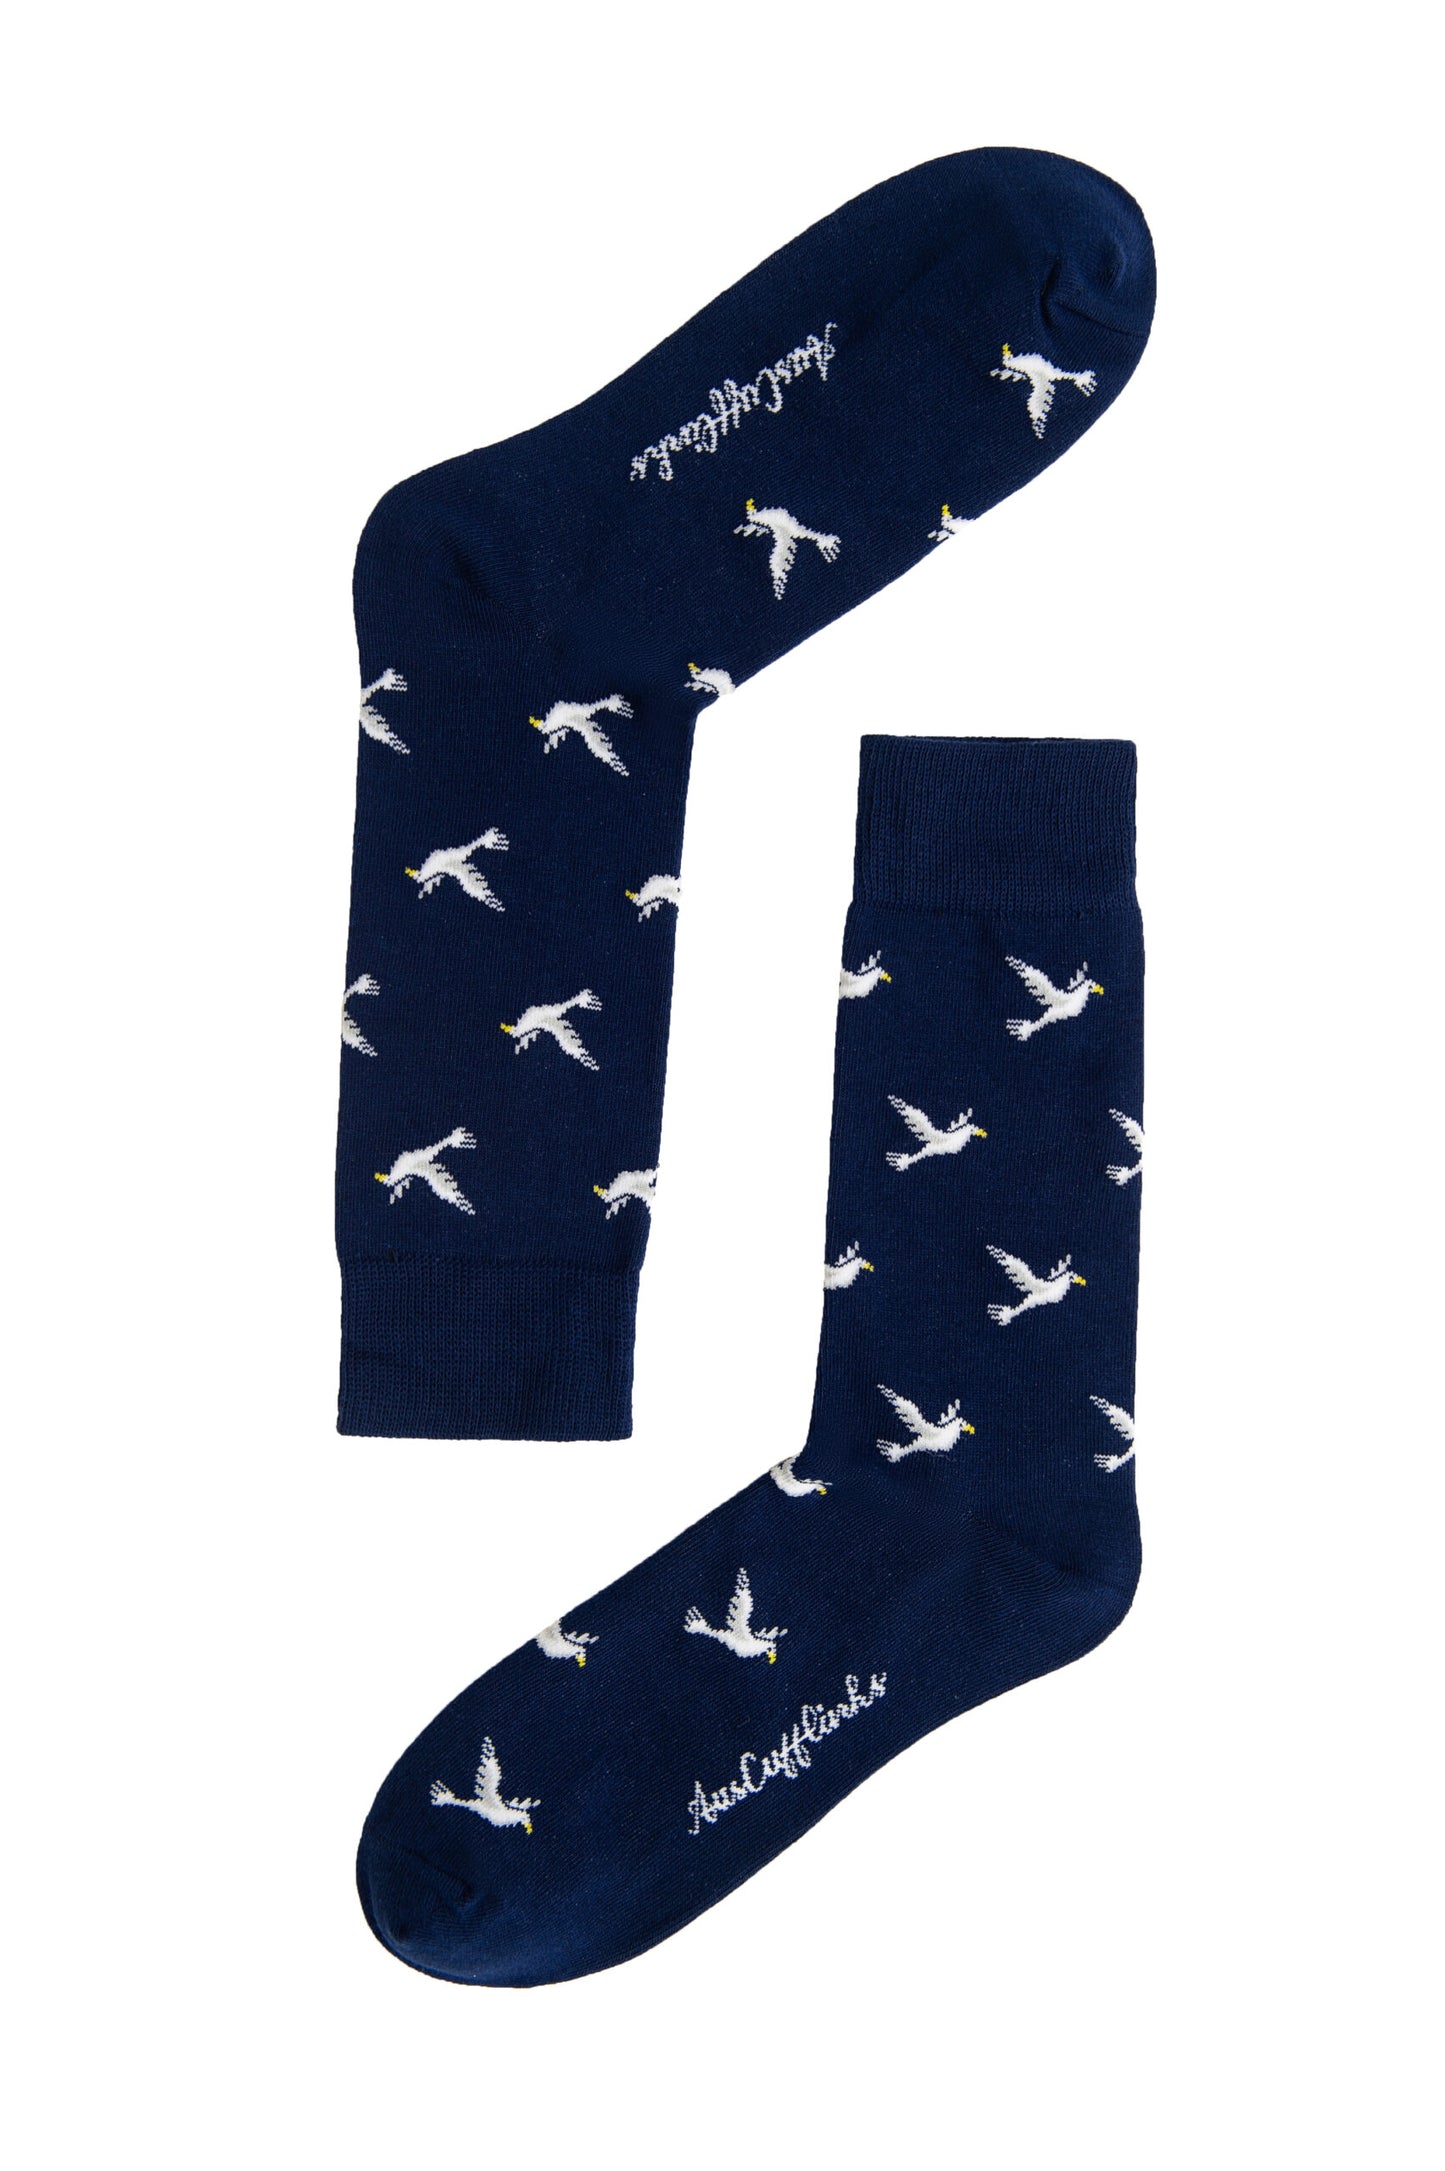 A pair of navy Dove socks with white birds on them.